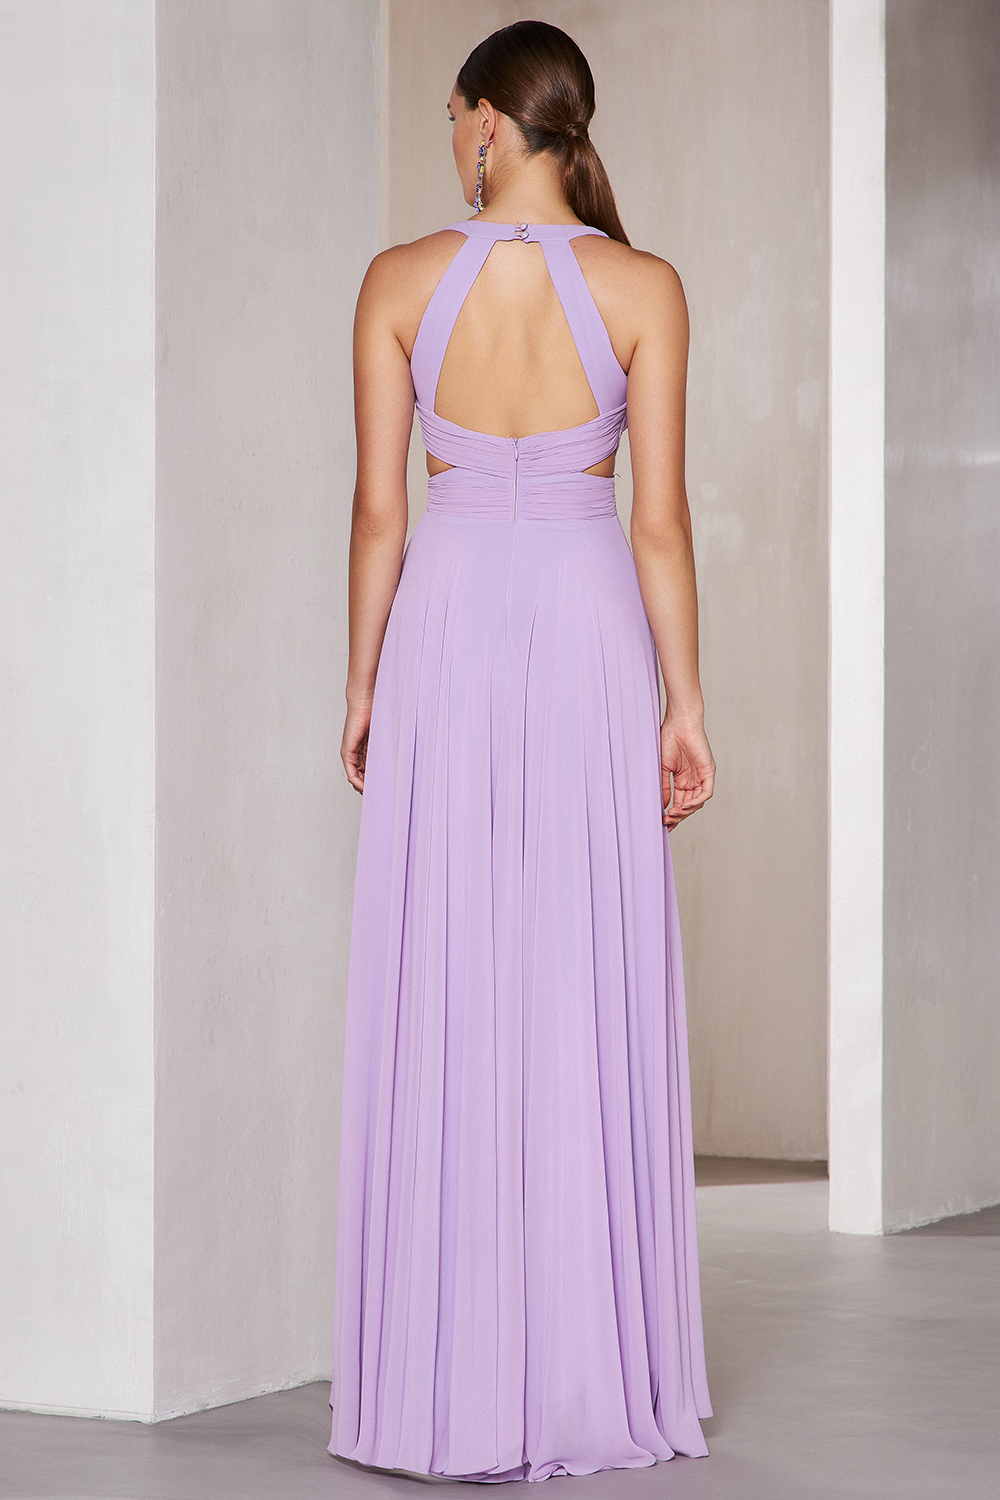 Cocktail Dresses / Long cocktail chiffon dress with open back